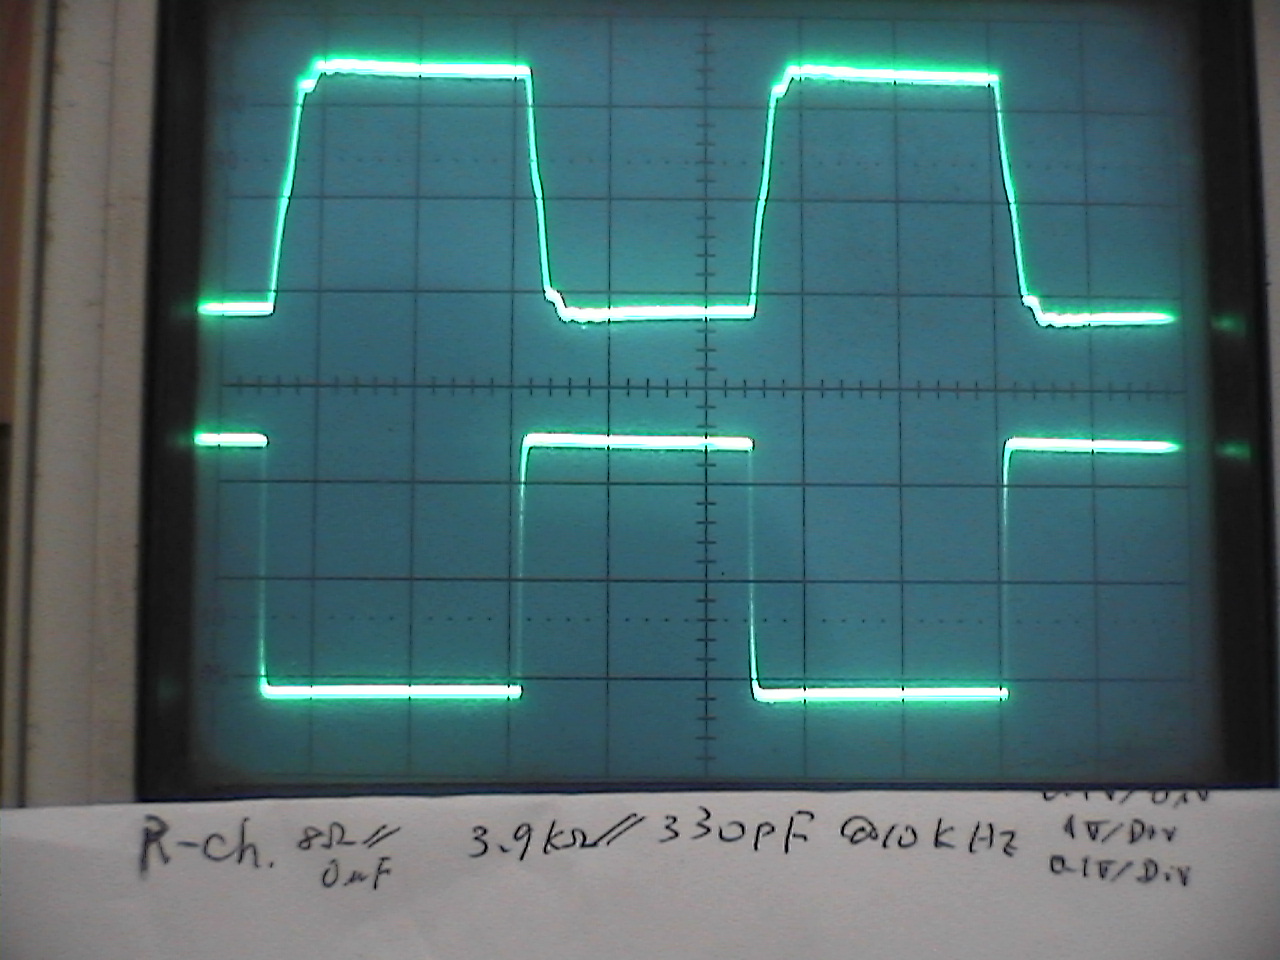 10kHz square wave response into load of 8ohm